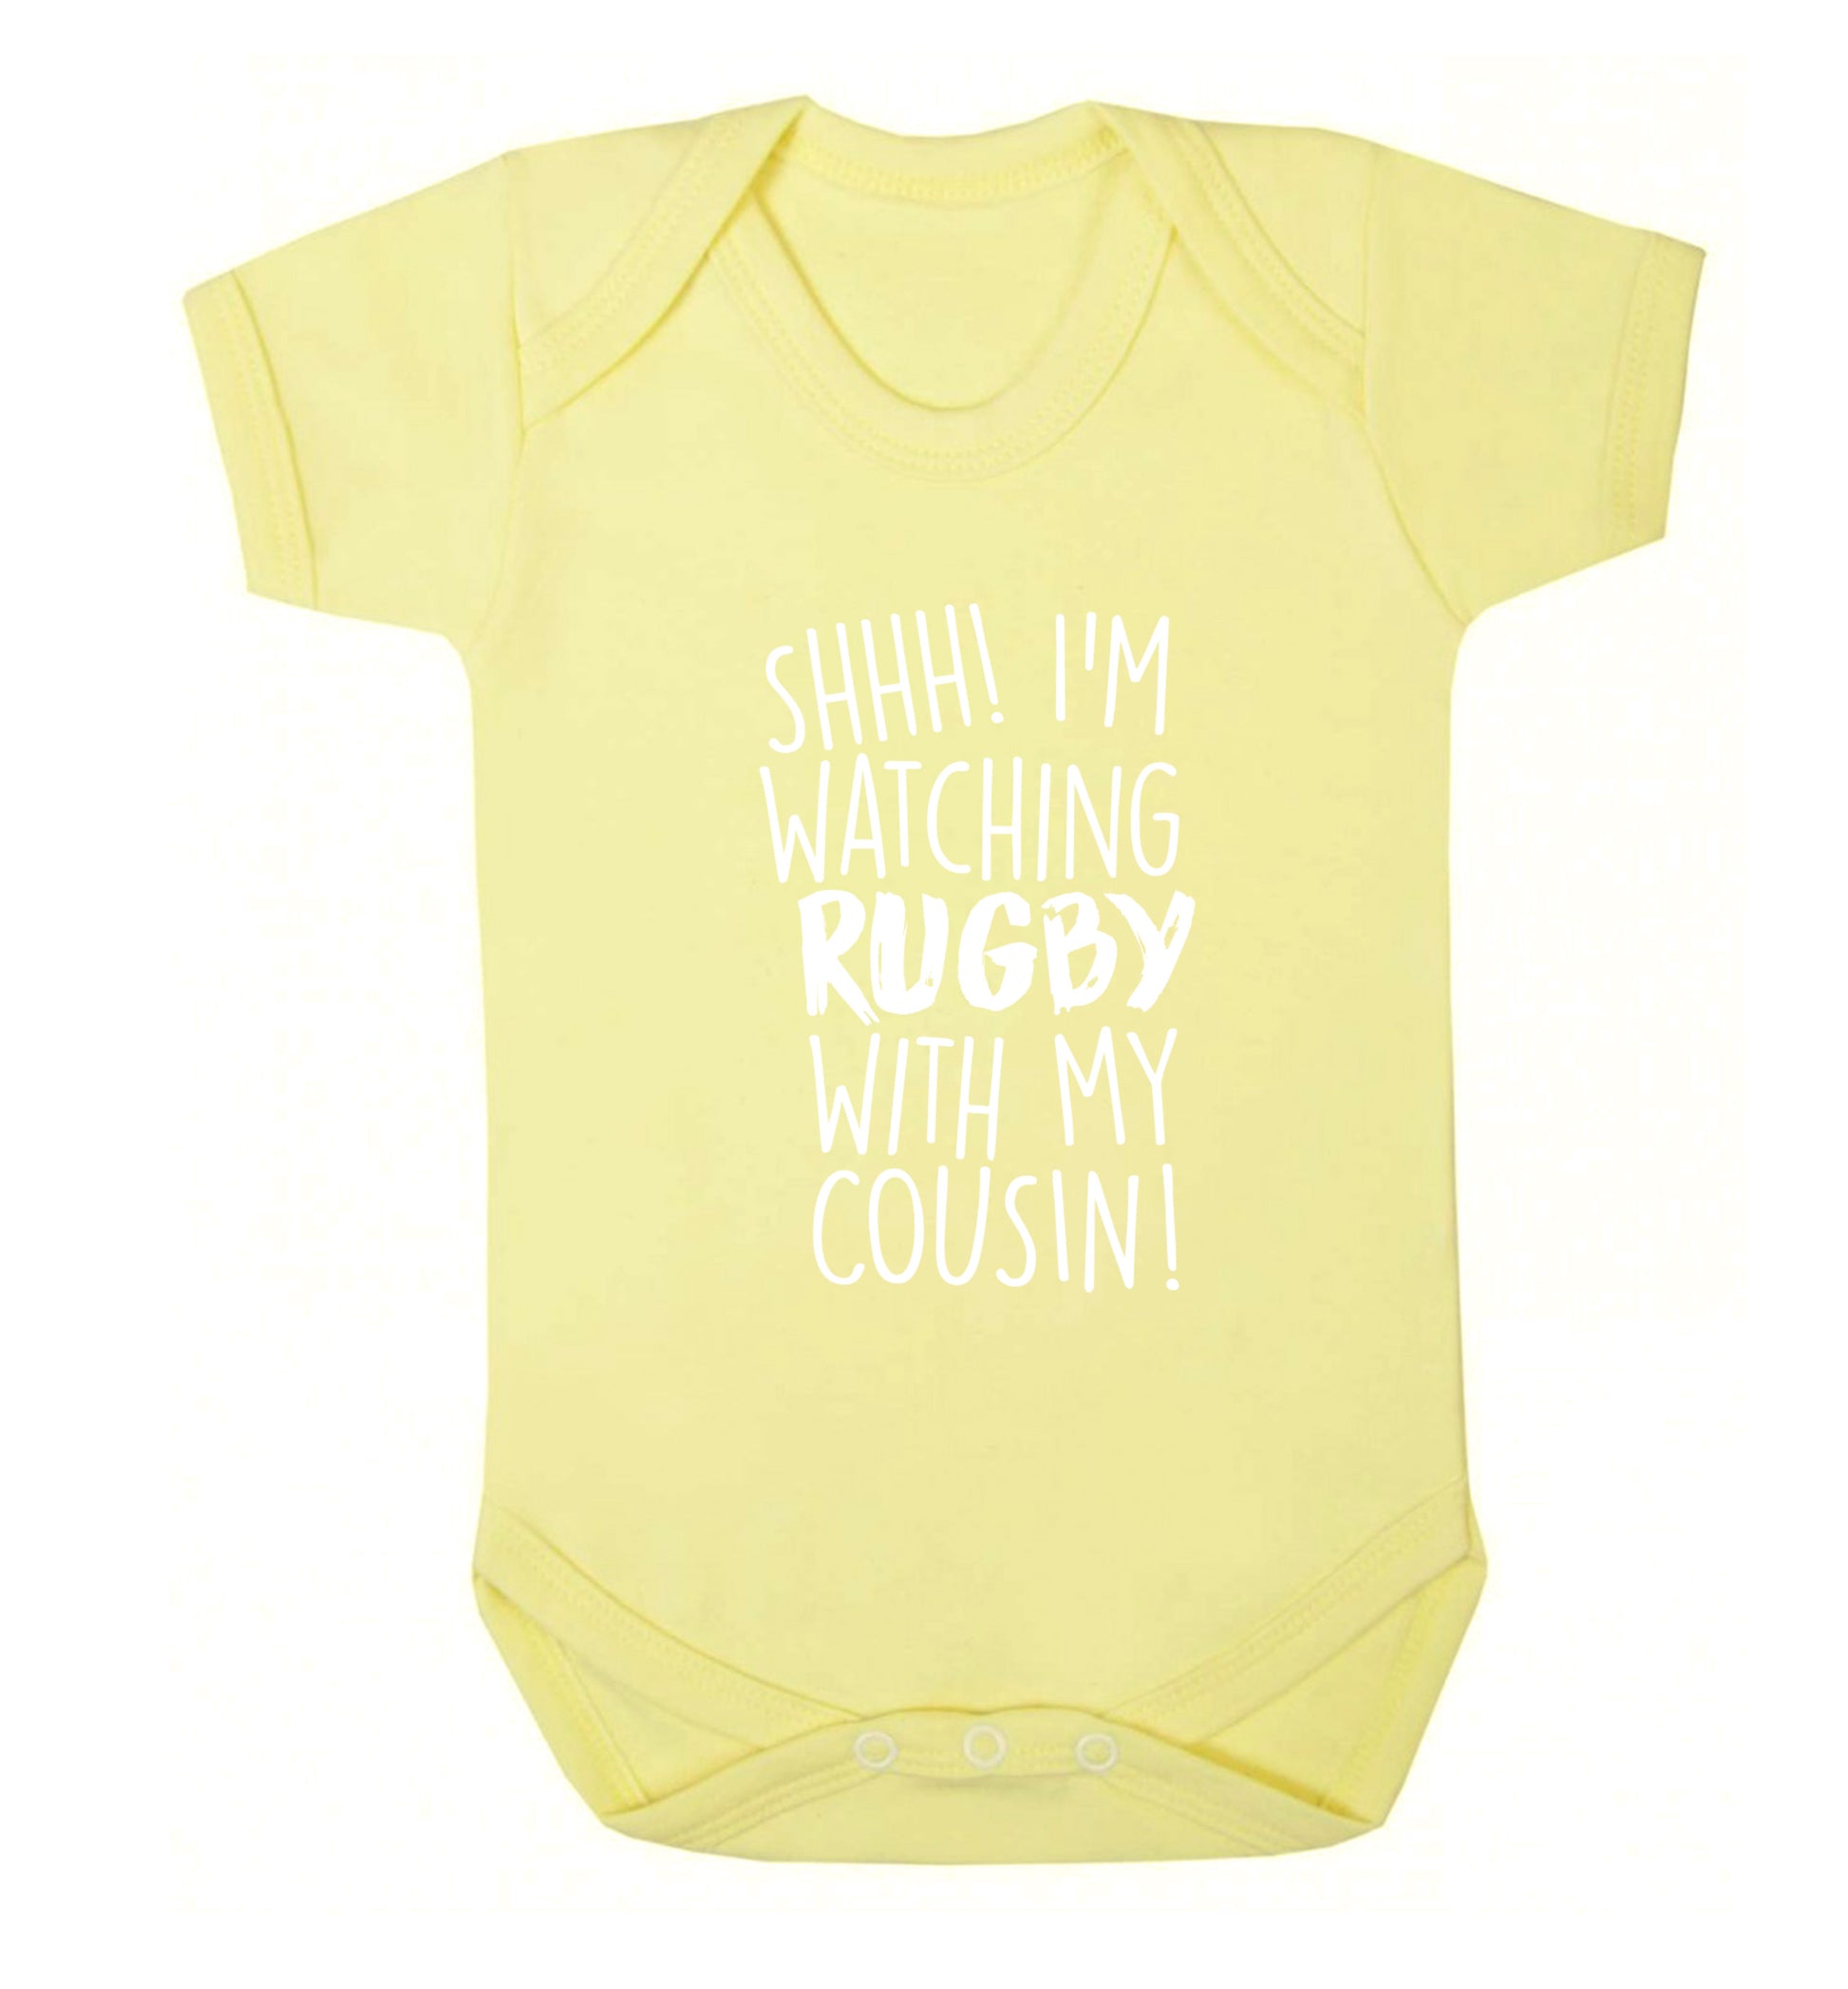 Shhh I'm watching rugby with my cousin Baby Vest pale yellow 18-24 months